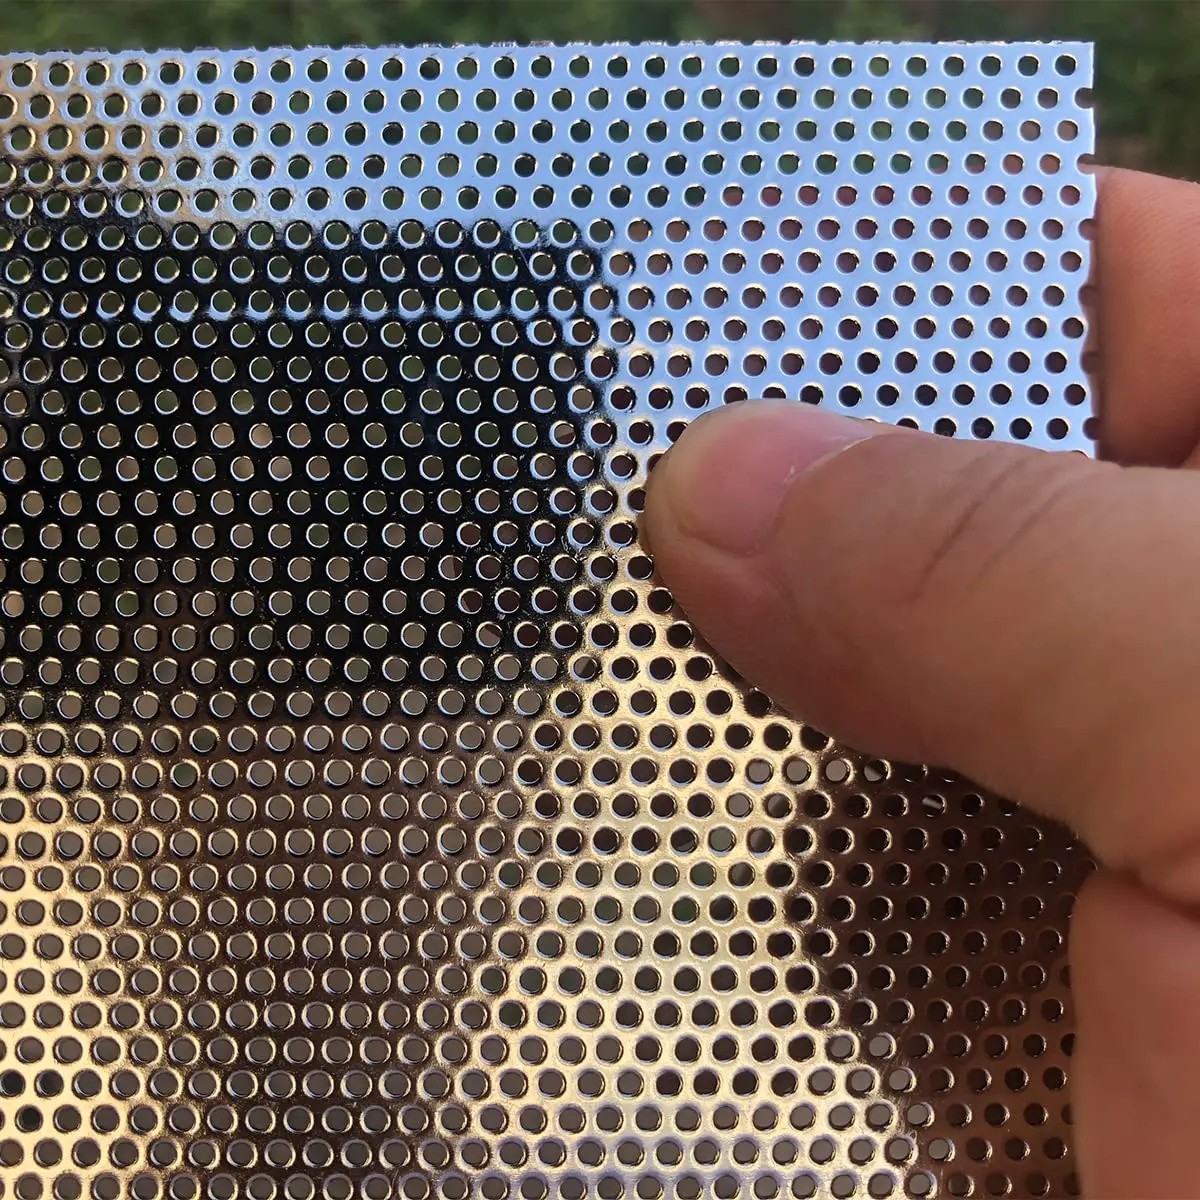  Perforated Metal Mesh for Diverse Applications: Features and Uses